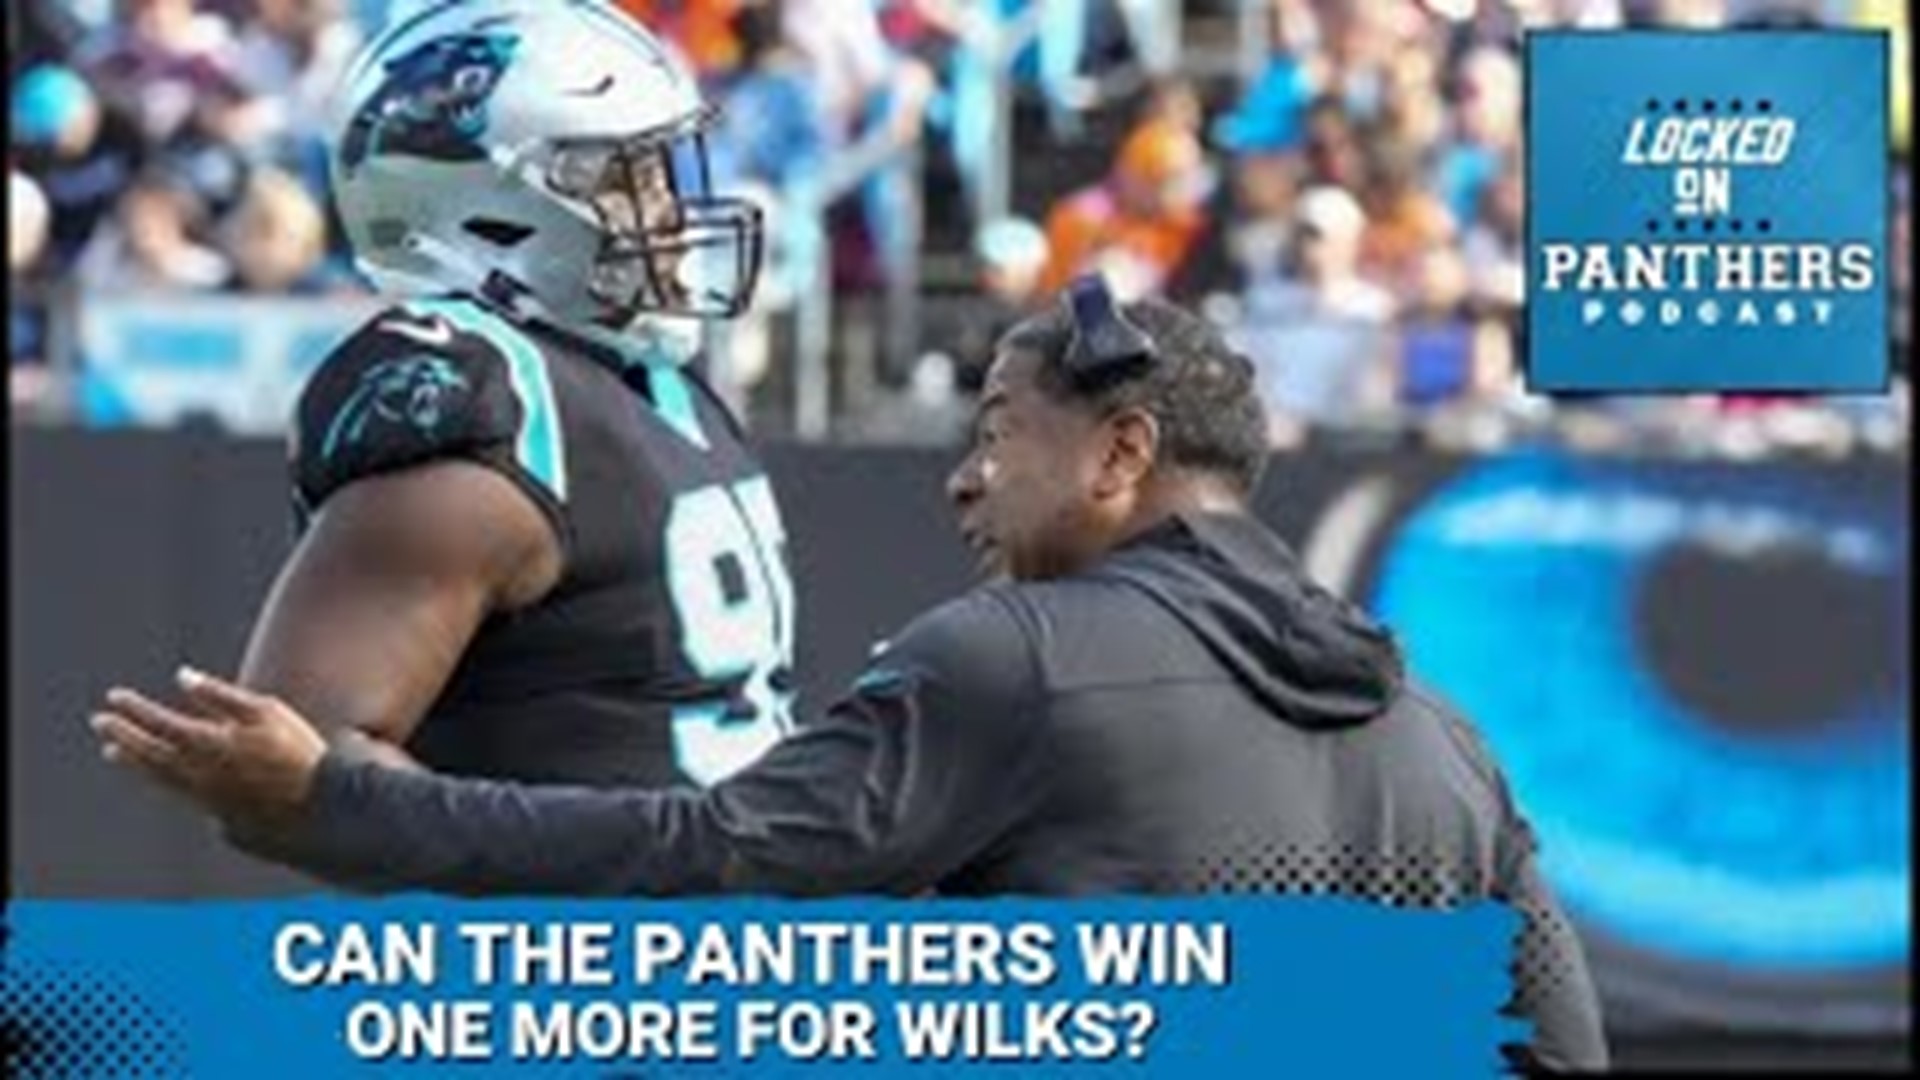 Can Wilks add one more win to his resume as he hopes to land the full-time coaching job? That and more on Locked On Panthers